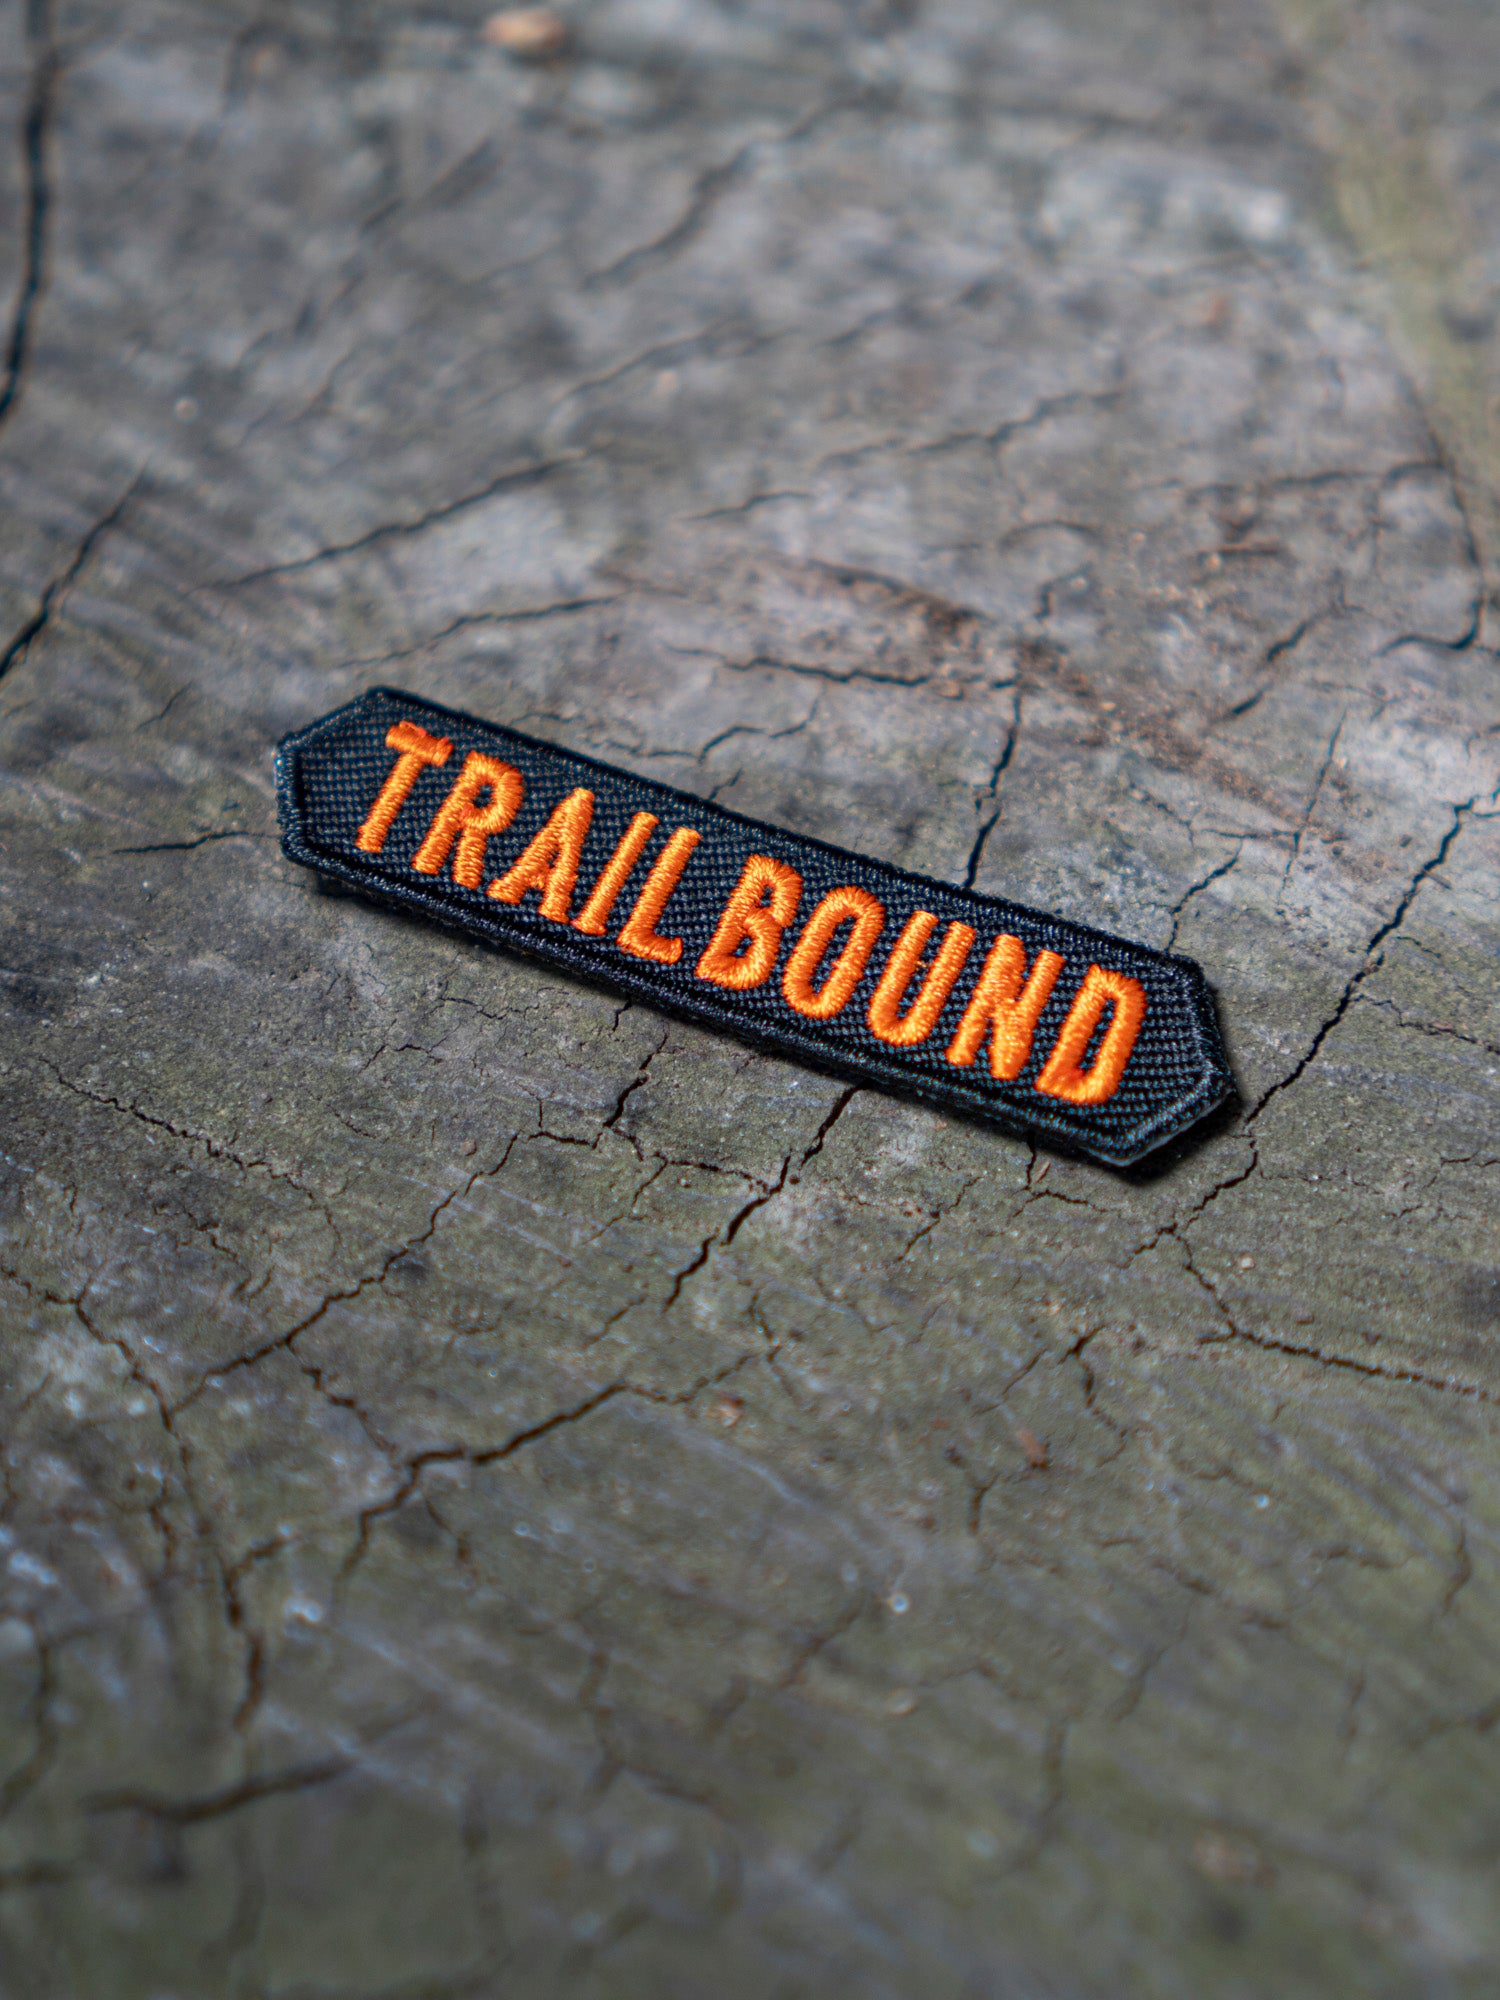 Trailbound Sign Velcro Patch